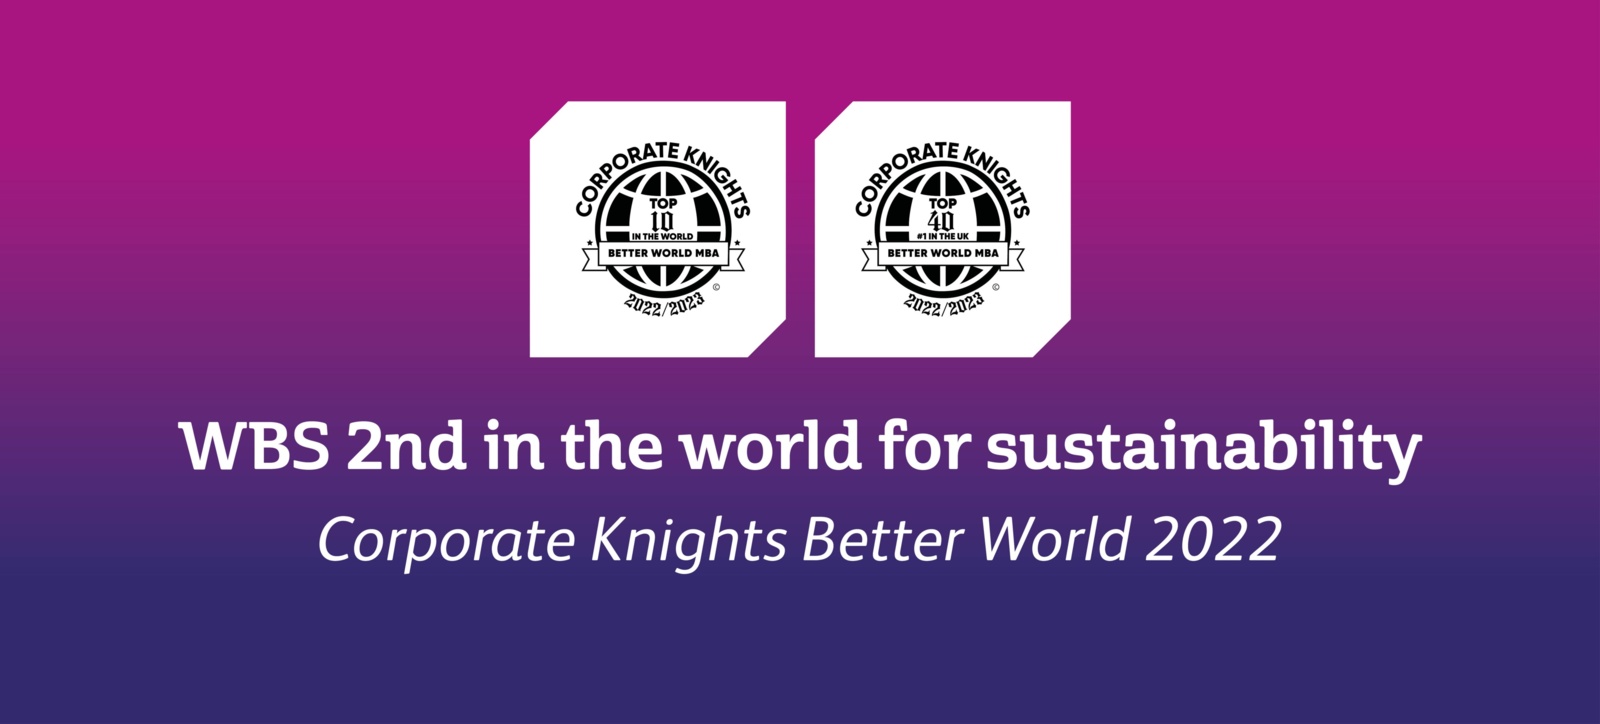 Warwick Business School, which has been ranked second globally for sustainability by Corporate Knights